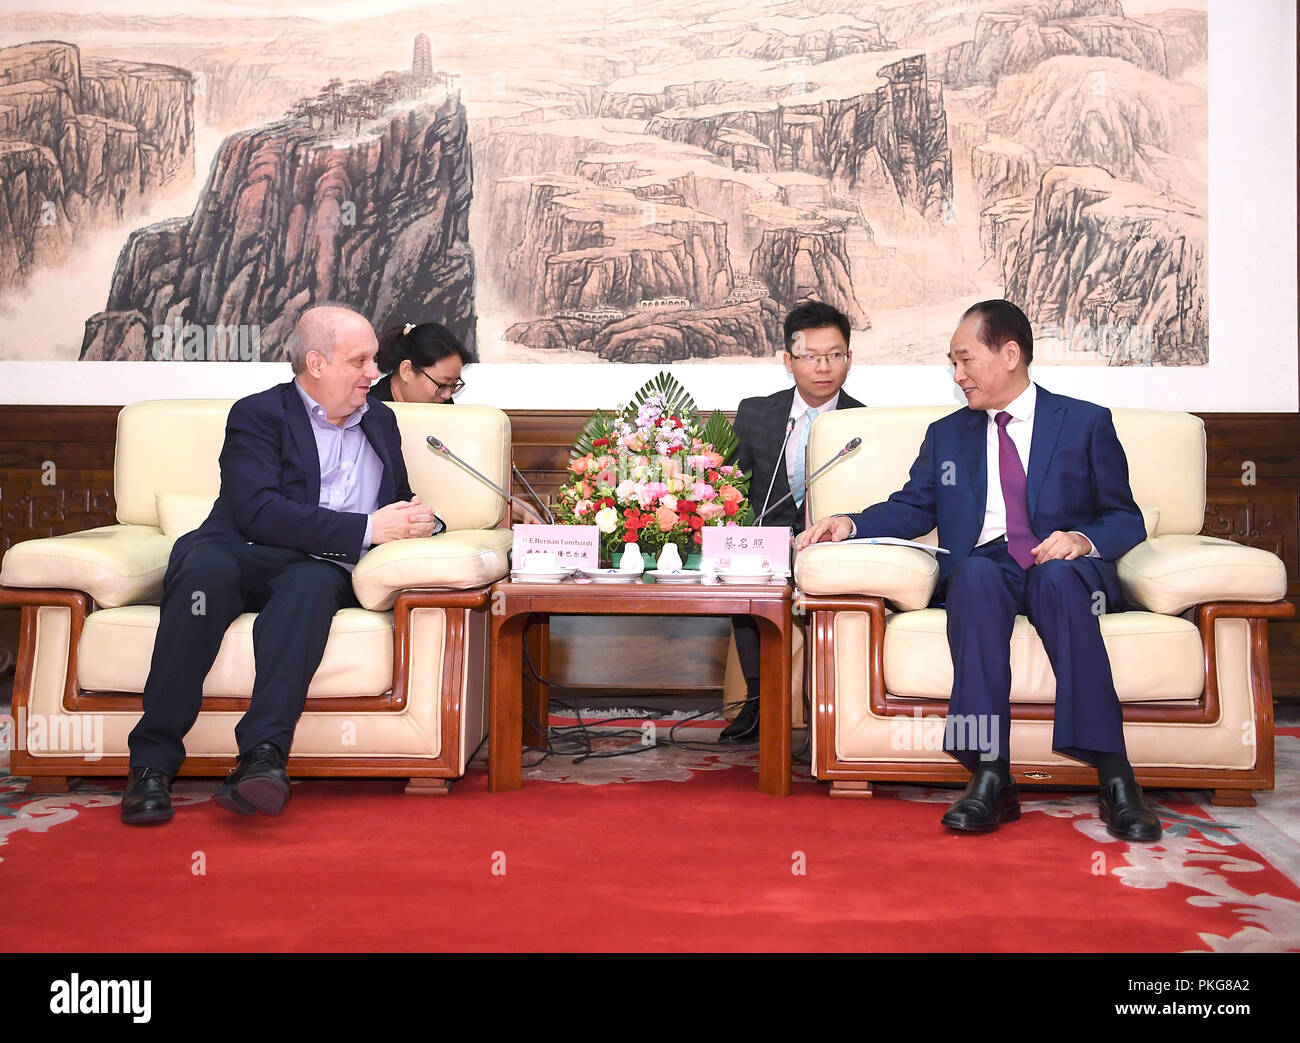 (180913) -- BEIJING, Sept. 13, 2018 (Xinhua) -- Cai Mingzhao (R, front), president of Xinhua News Agency, meets with Hernan Lombardi (L, front), minister of the Federal System of Media and Public Content of Argentina, in Beijing, capital of China, Sept. 13, 2018. Active interactions between Chinese and Argentine leaders in recent years have pointed out the direction of the two countries' comprehensive strategic partnership, Cai said. Saying the media should play its role as a bridge linking the people of China and Argentina, Cai stressed Xinhua will help deepen the two countries' frien Stock Photo